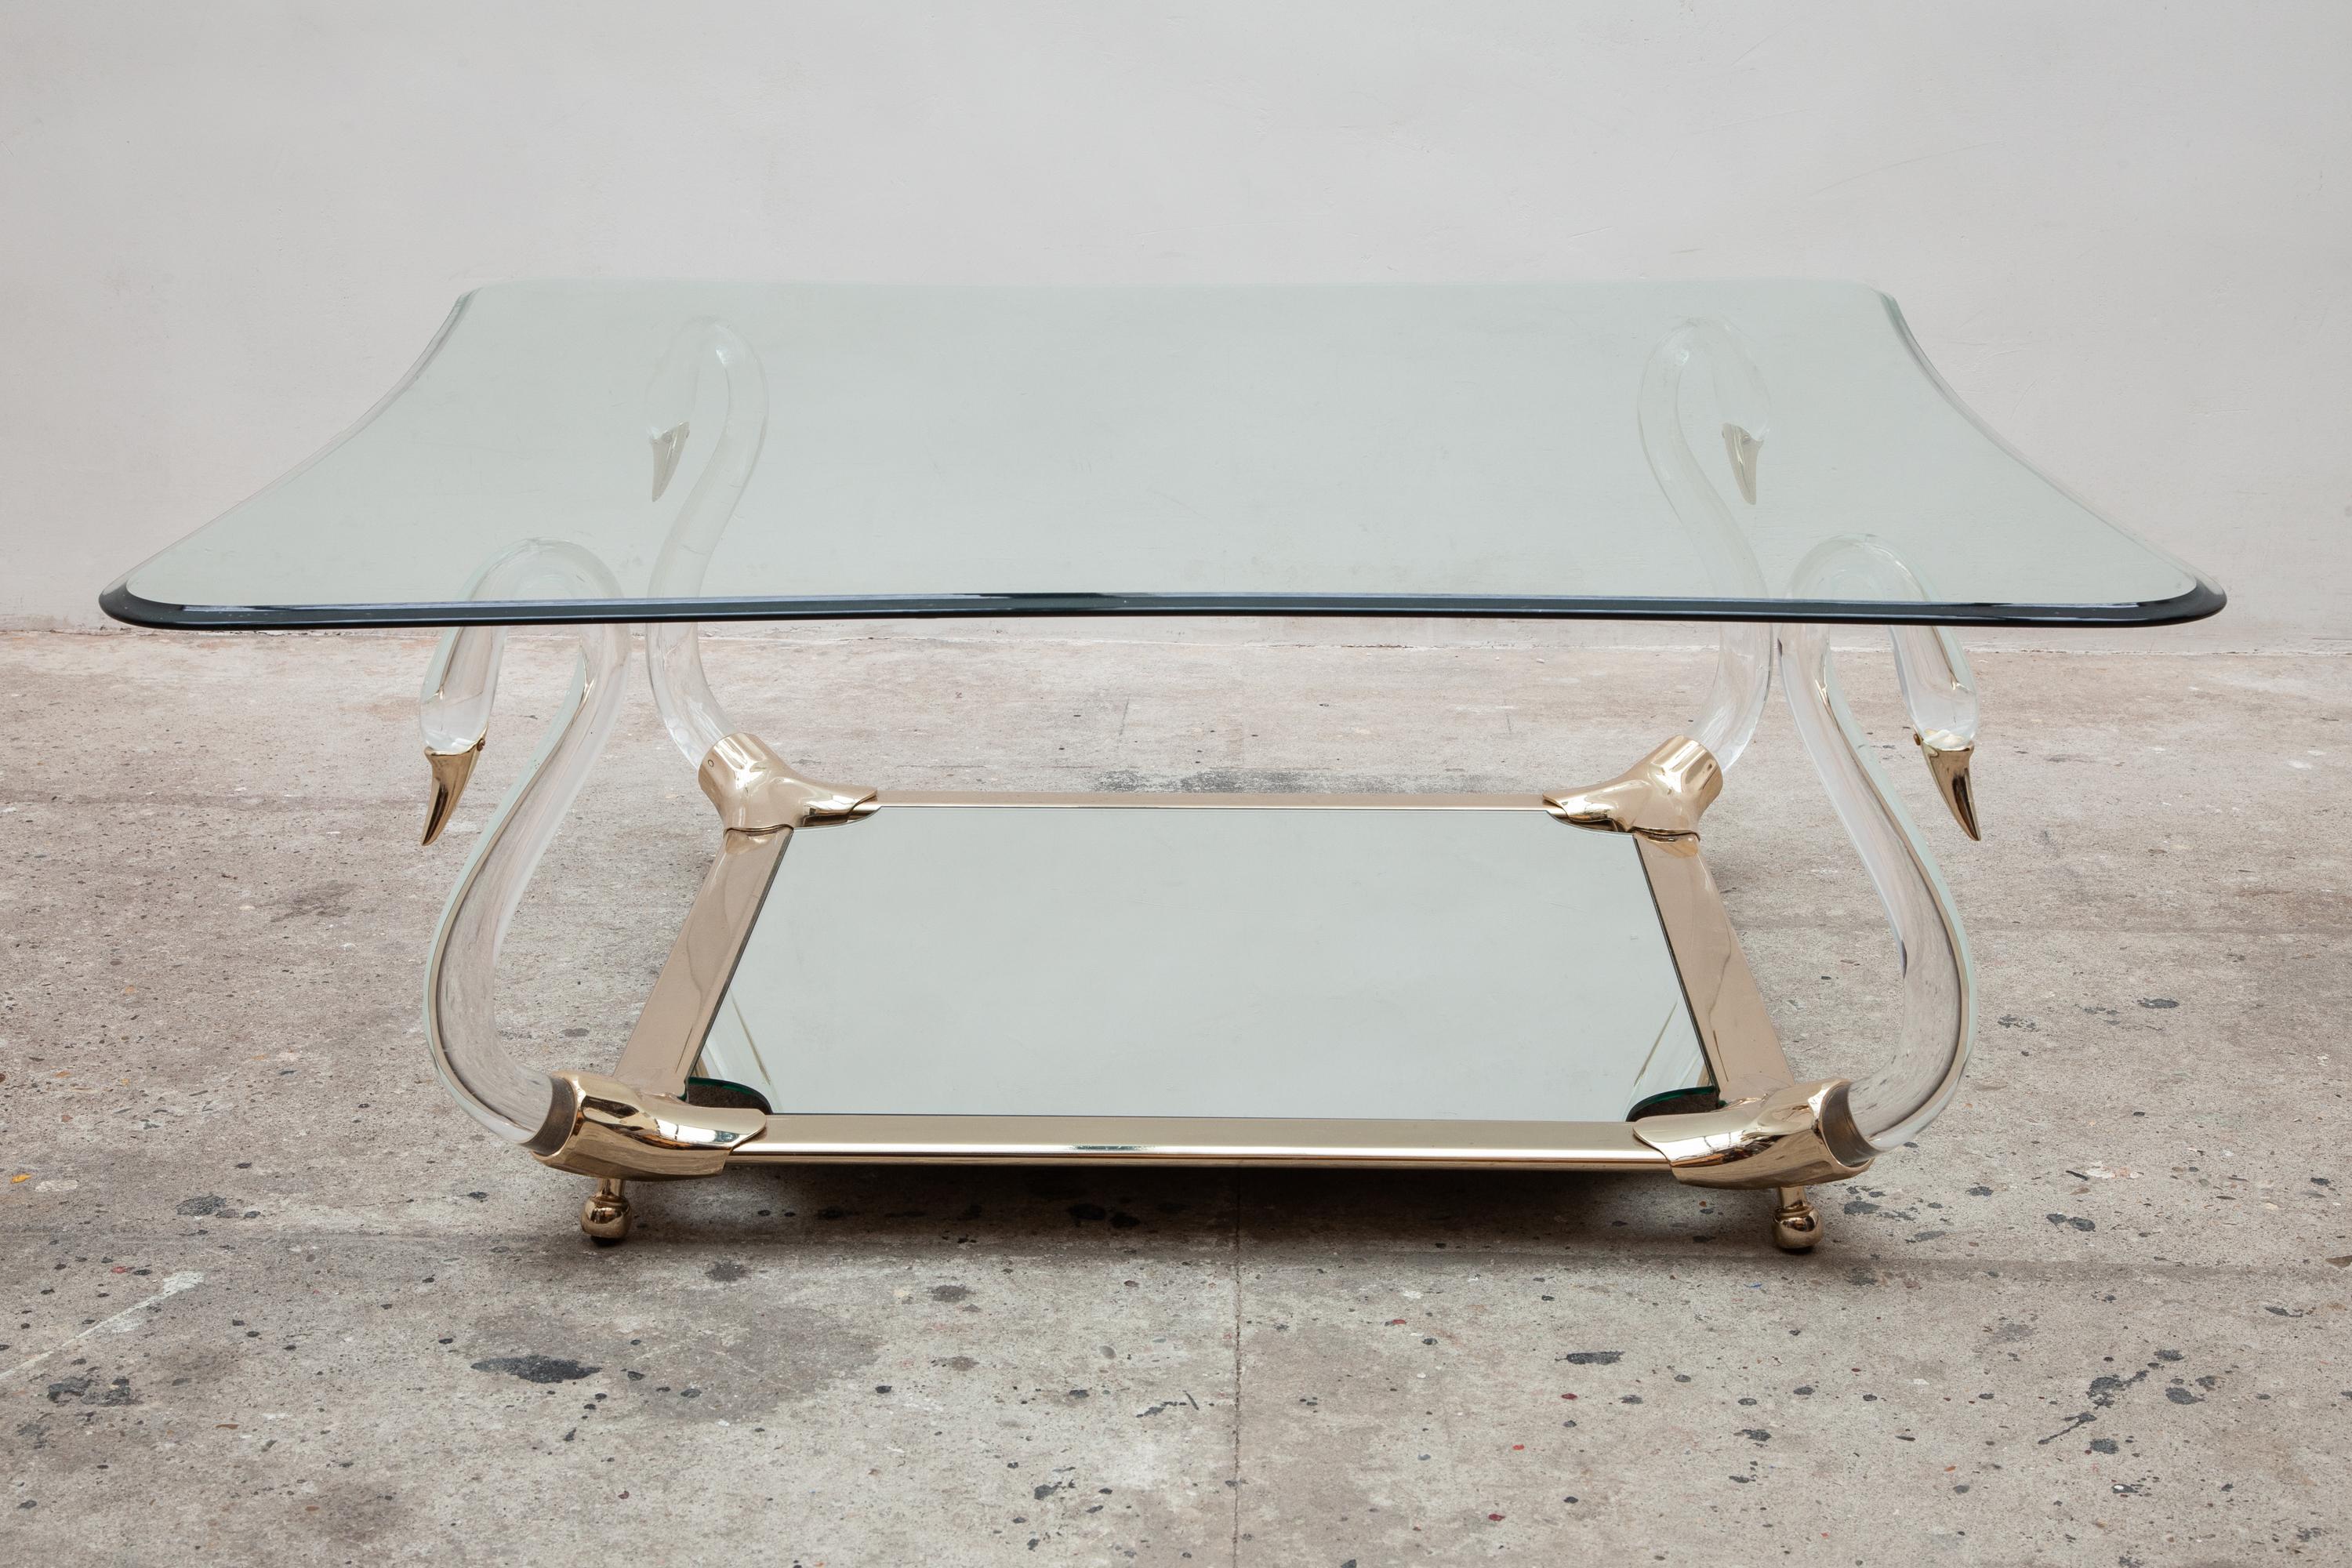 Square vintage 1970s swan table glass top coffee table with mirrored under shelf.
Features Lucite legs shaped like swan necks with gold beaks.
Measures: 109 W x 44 H x 109 D cm.
